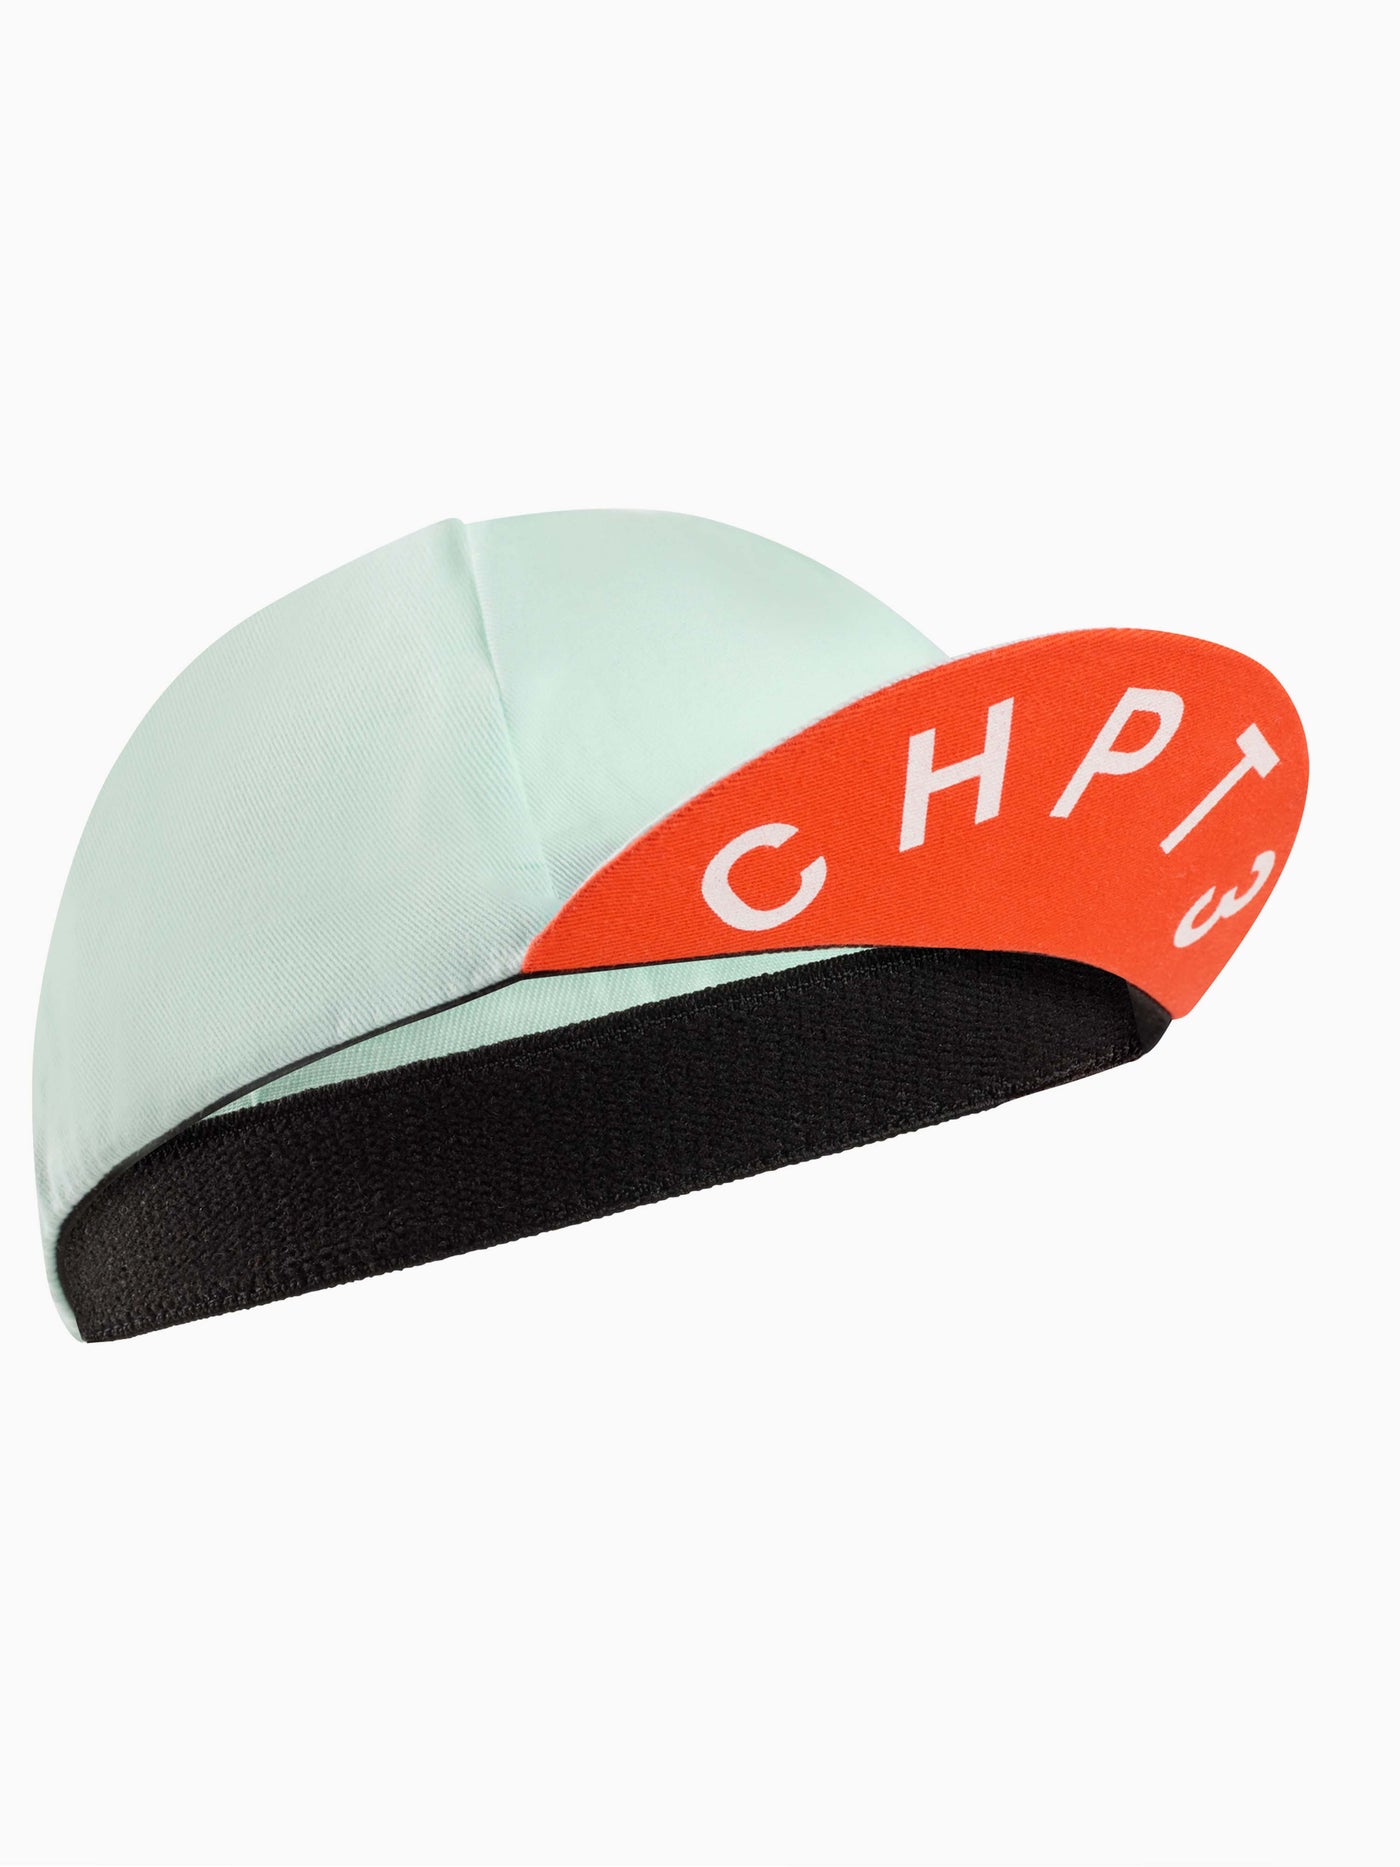 CHPT3 cotton cycling cap in Ice blue with showing the peak in Fire red #color_ice-blue